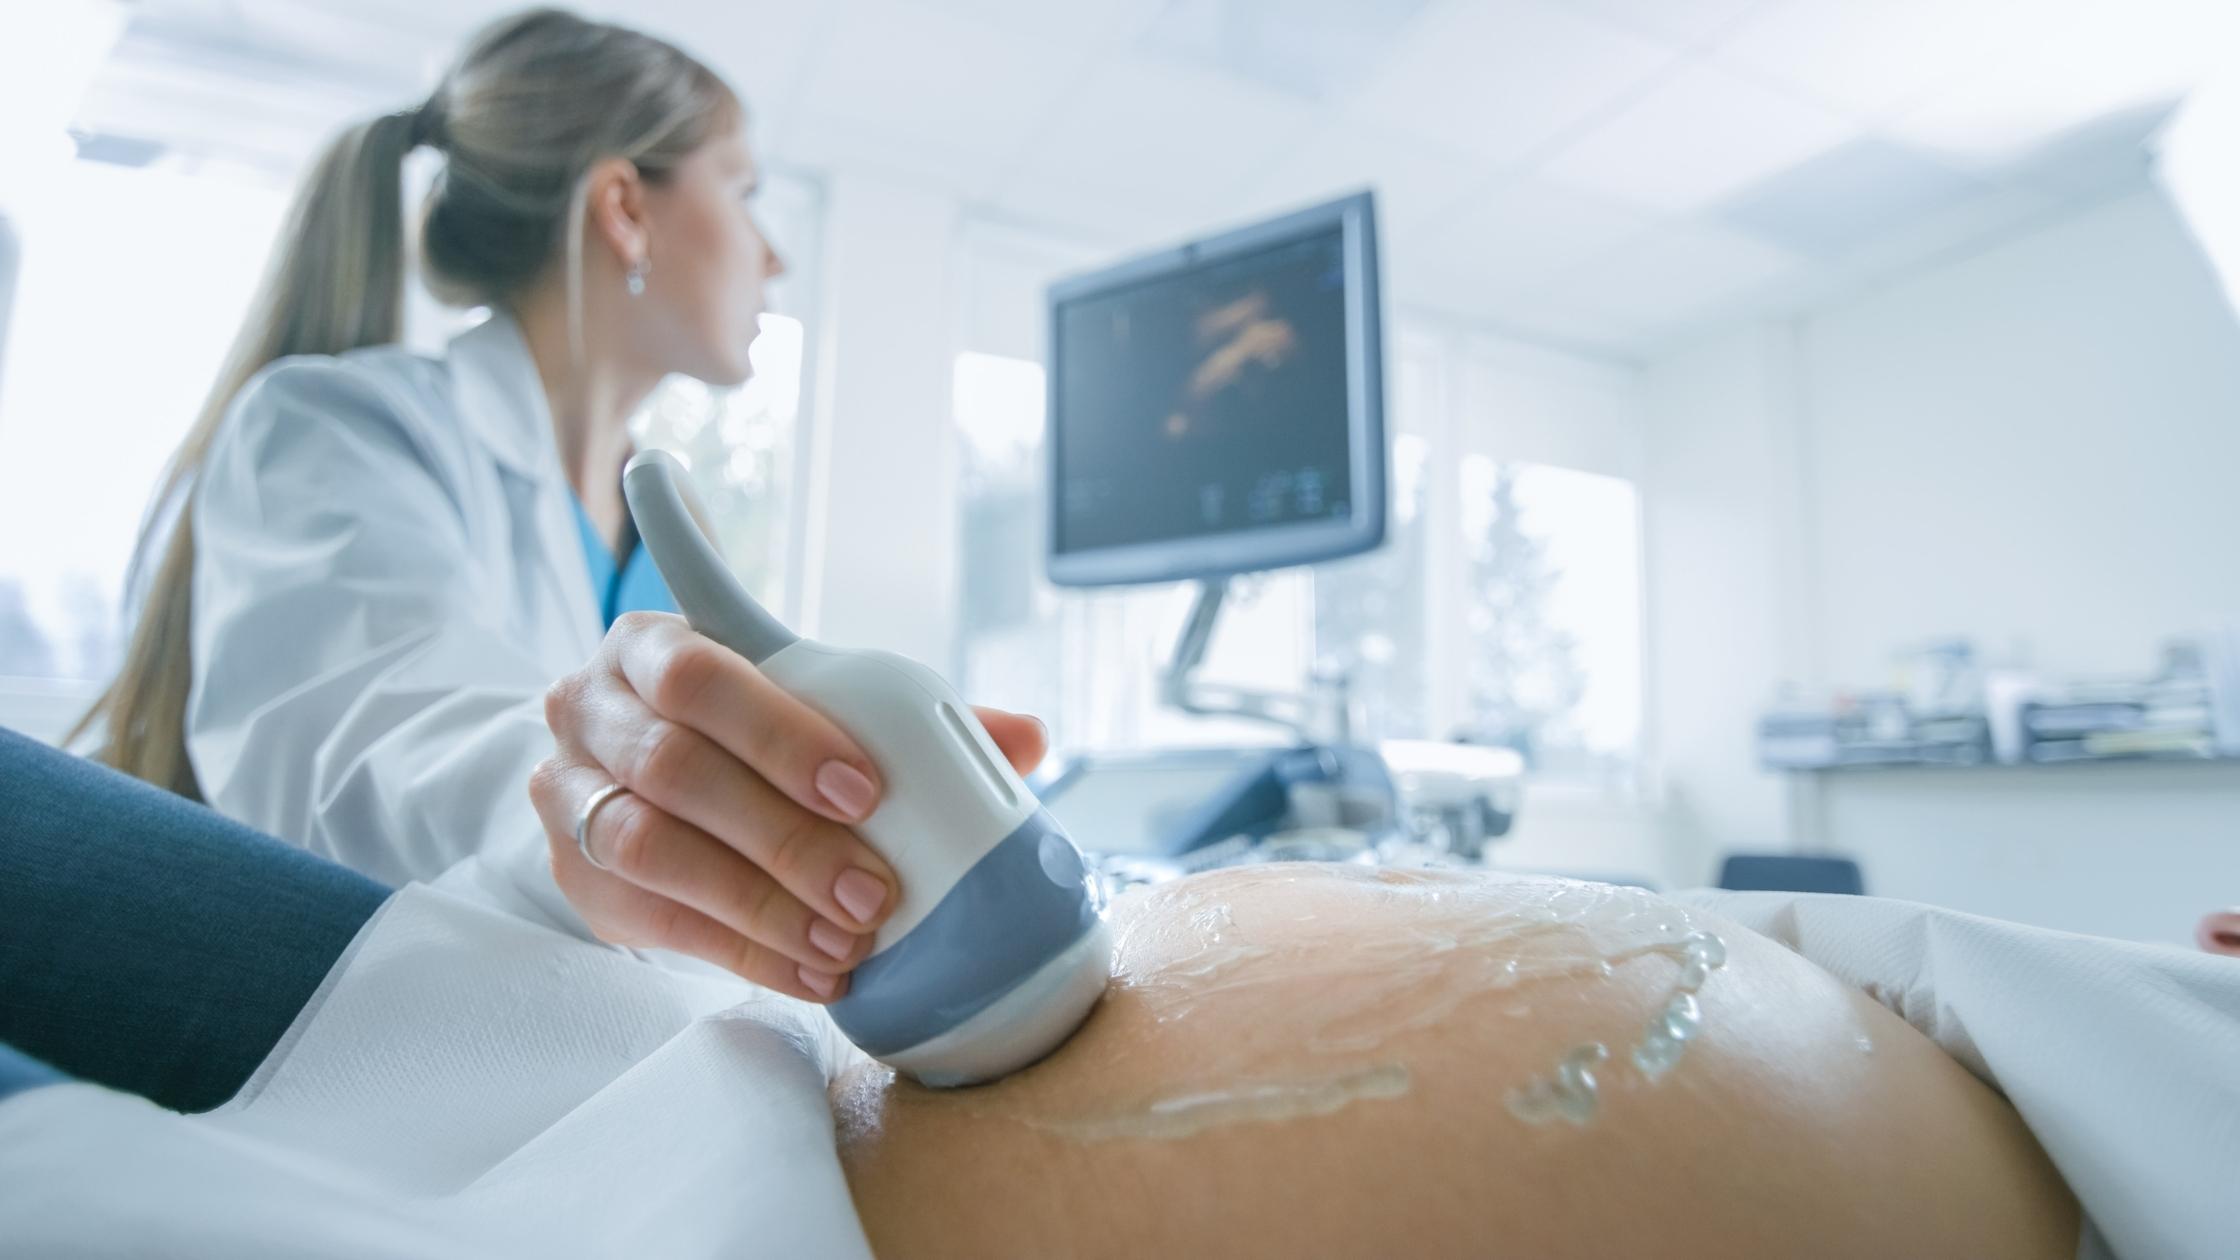 What Can You Expect from an Ultrasound?